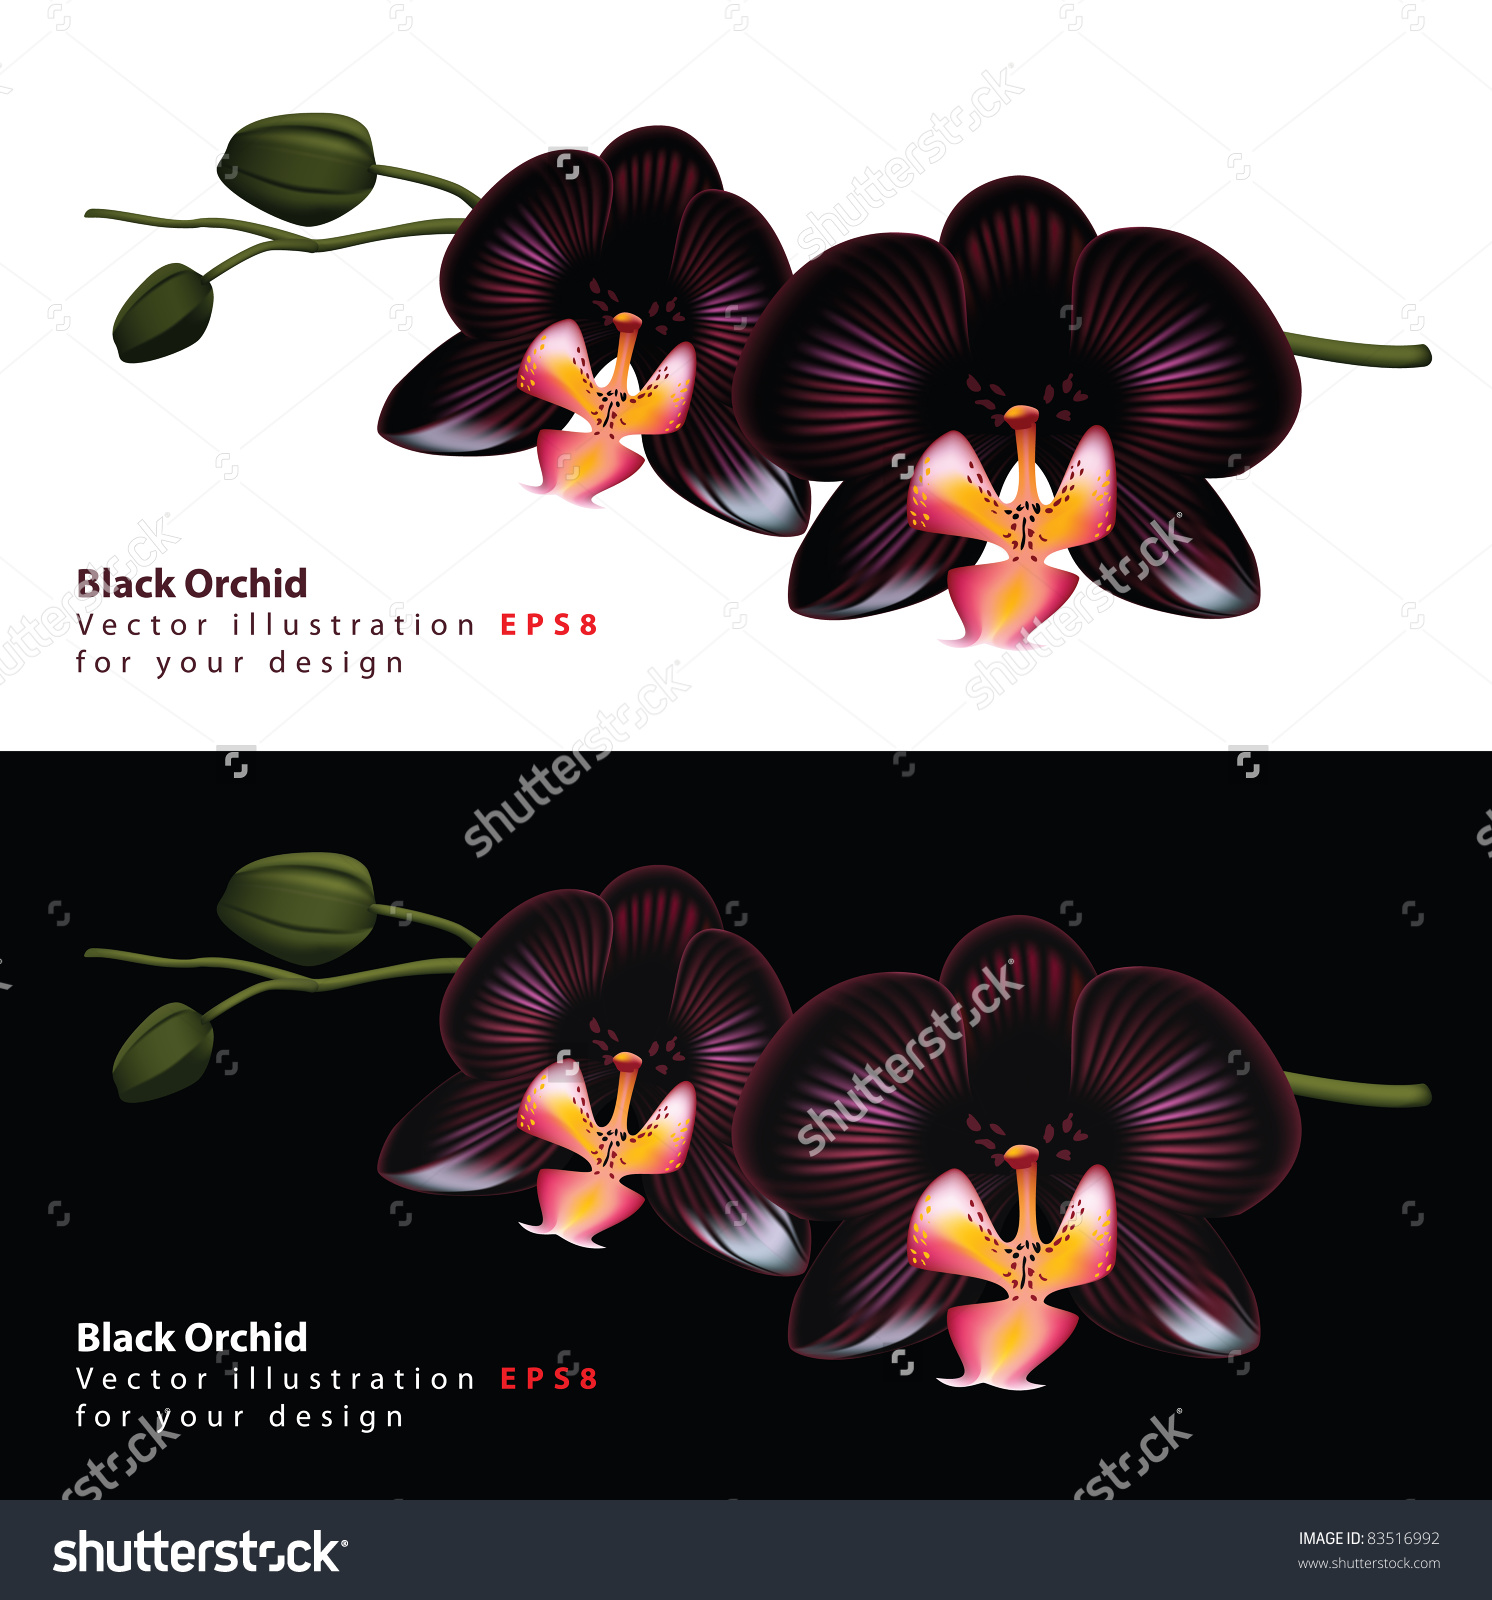 Amazing Black Orchid Pictures & Backgrounds